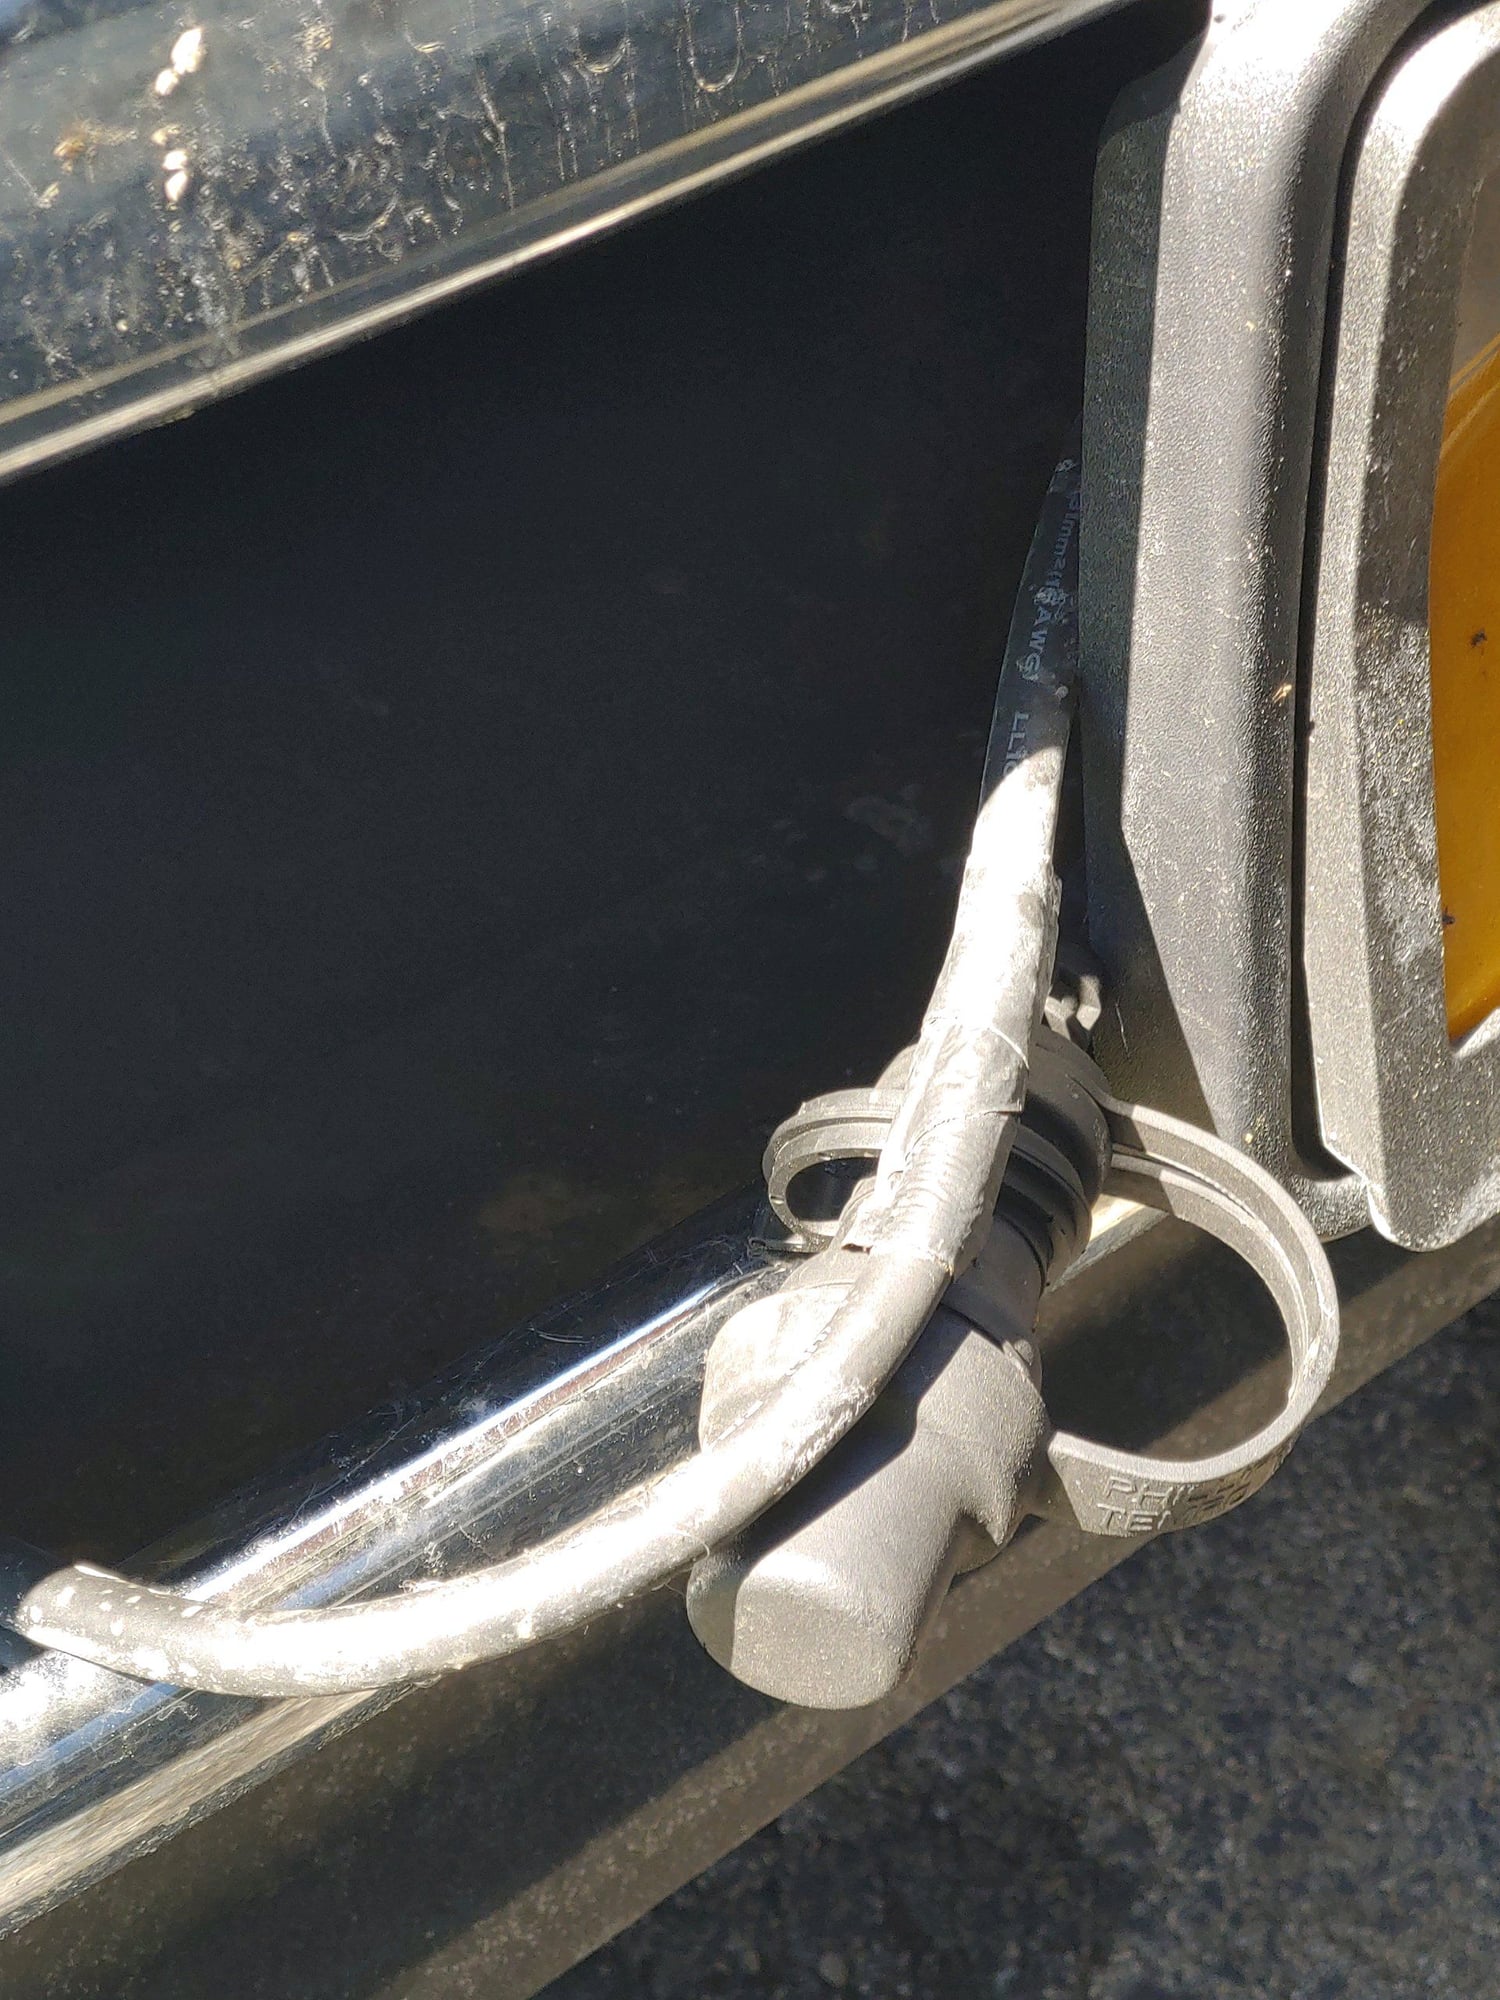 Weird plug hanging from front tow hook - Ford Truck Enthusiasts